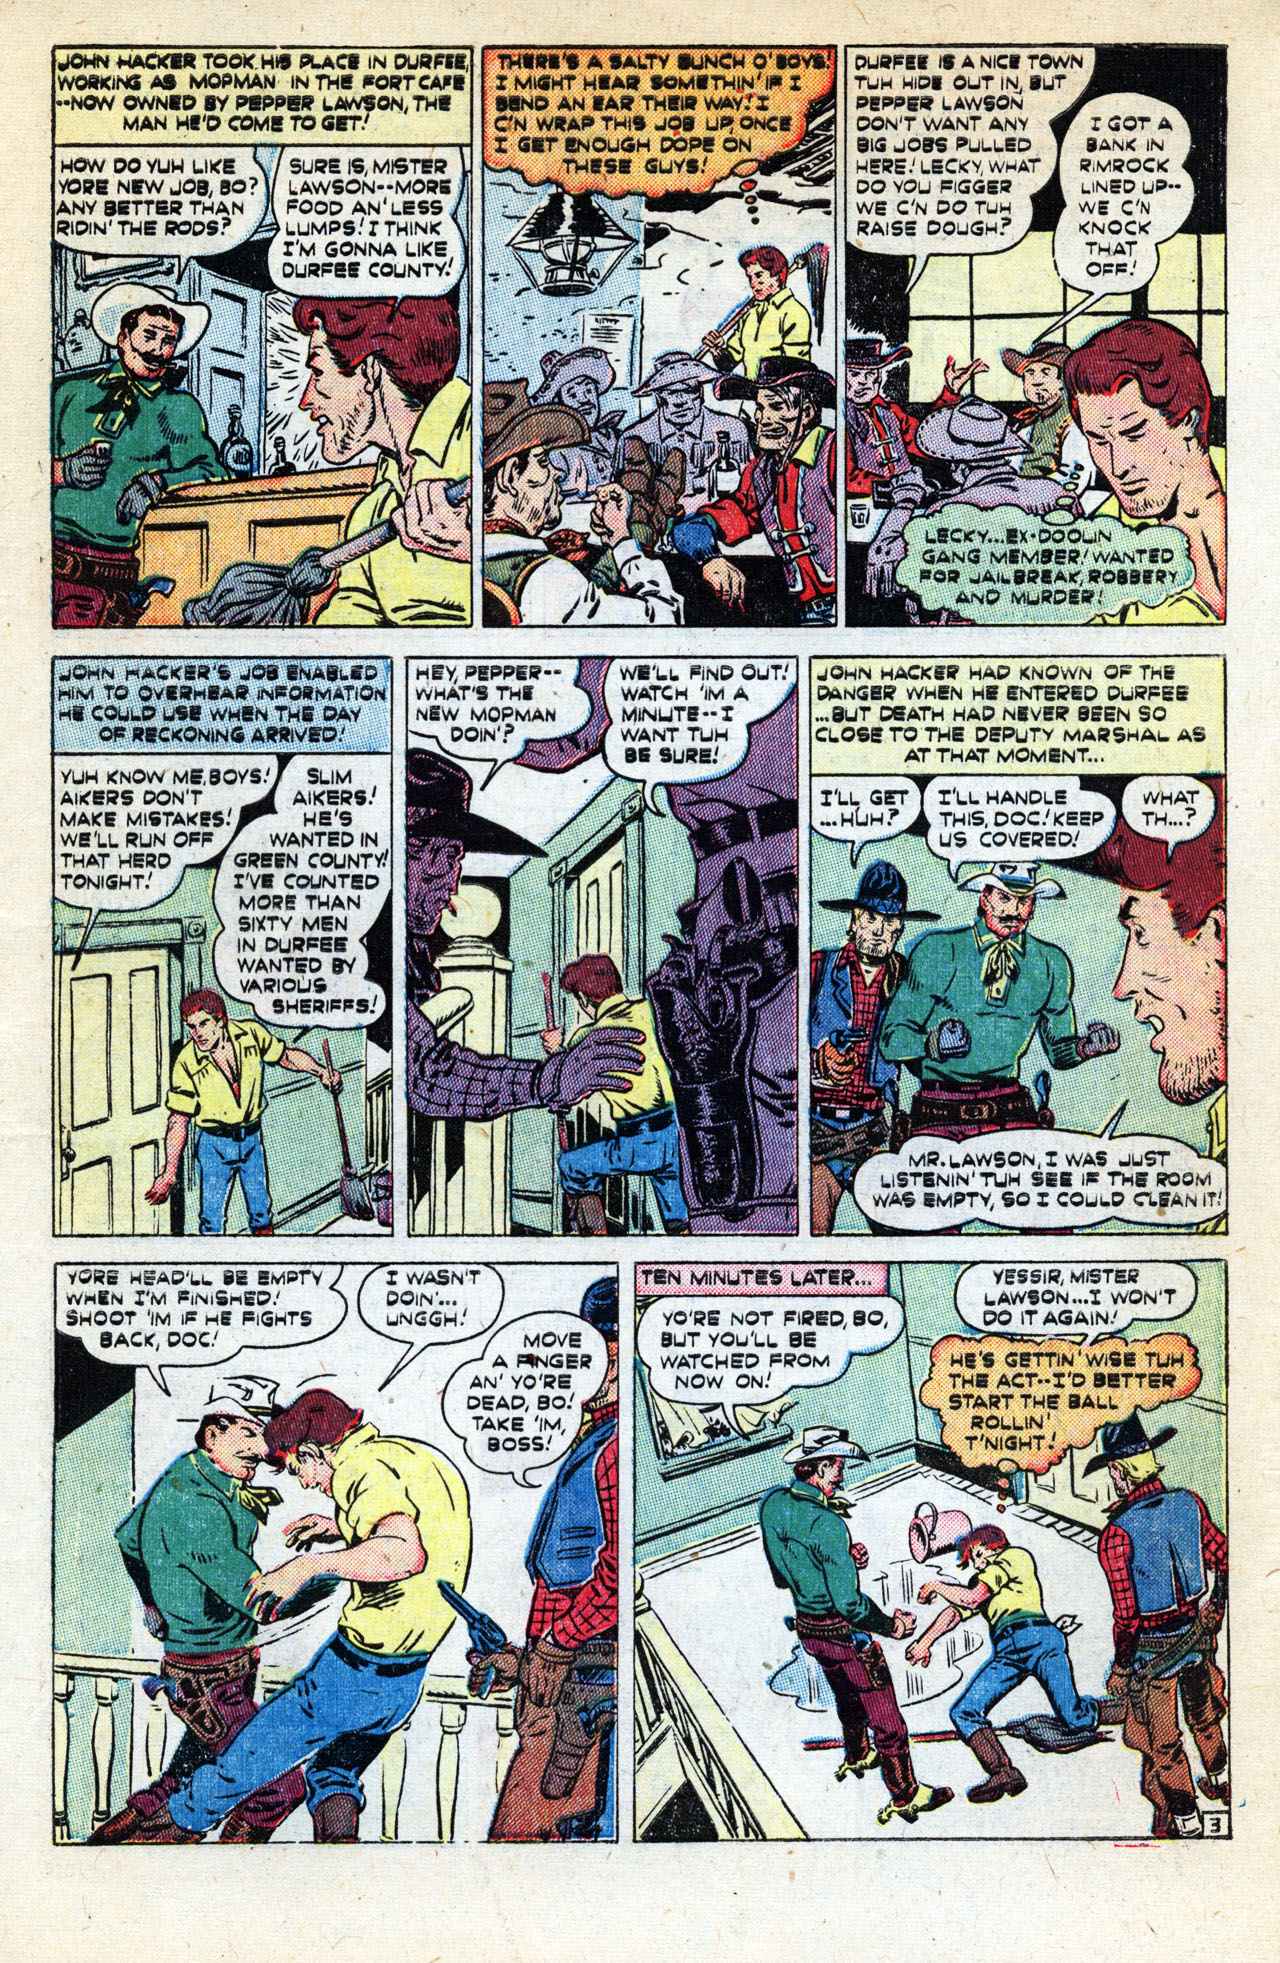 Western Outlaws and Sheriffs 61 Page 4